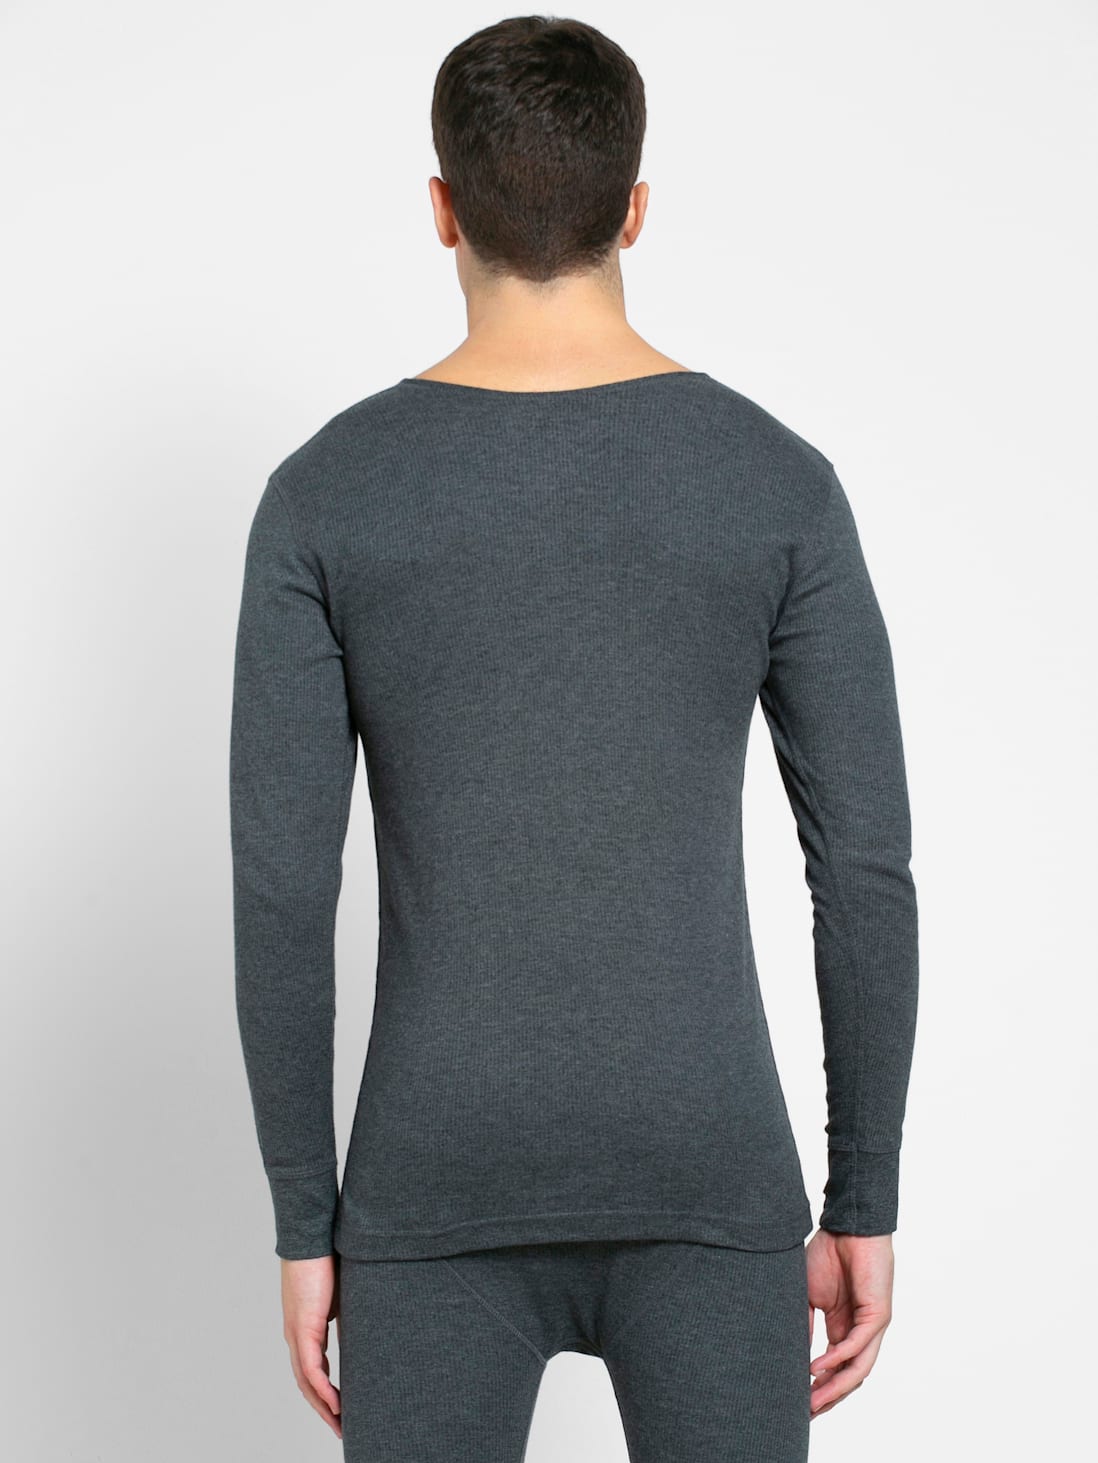 Buy Men's Super Combed Cotton Rich Full Sleeve Thermal Undershirt with ...